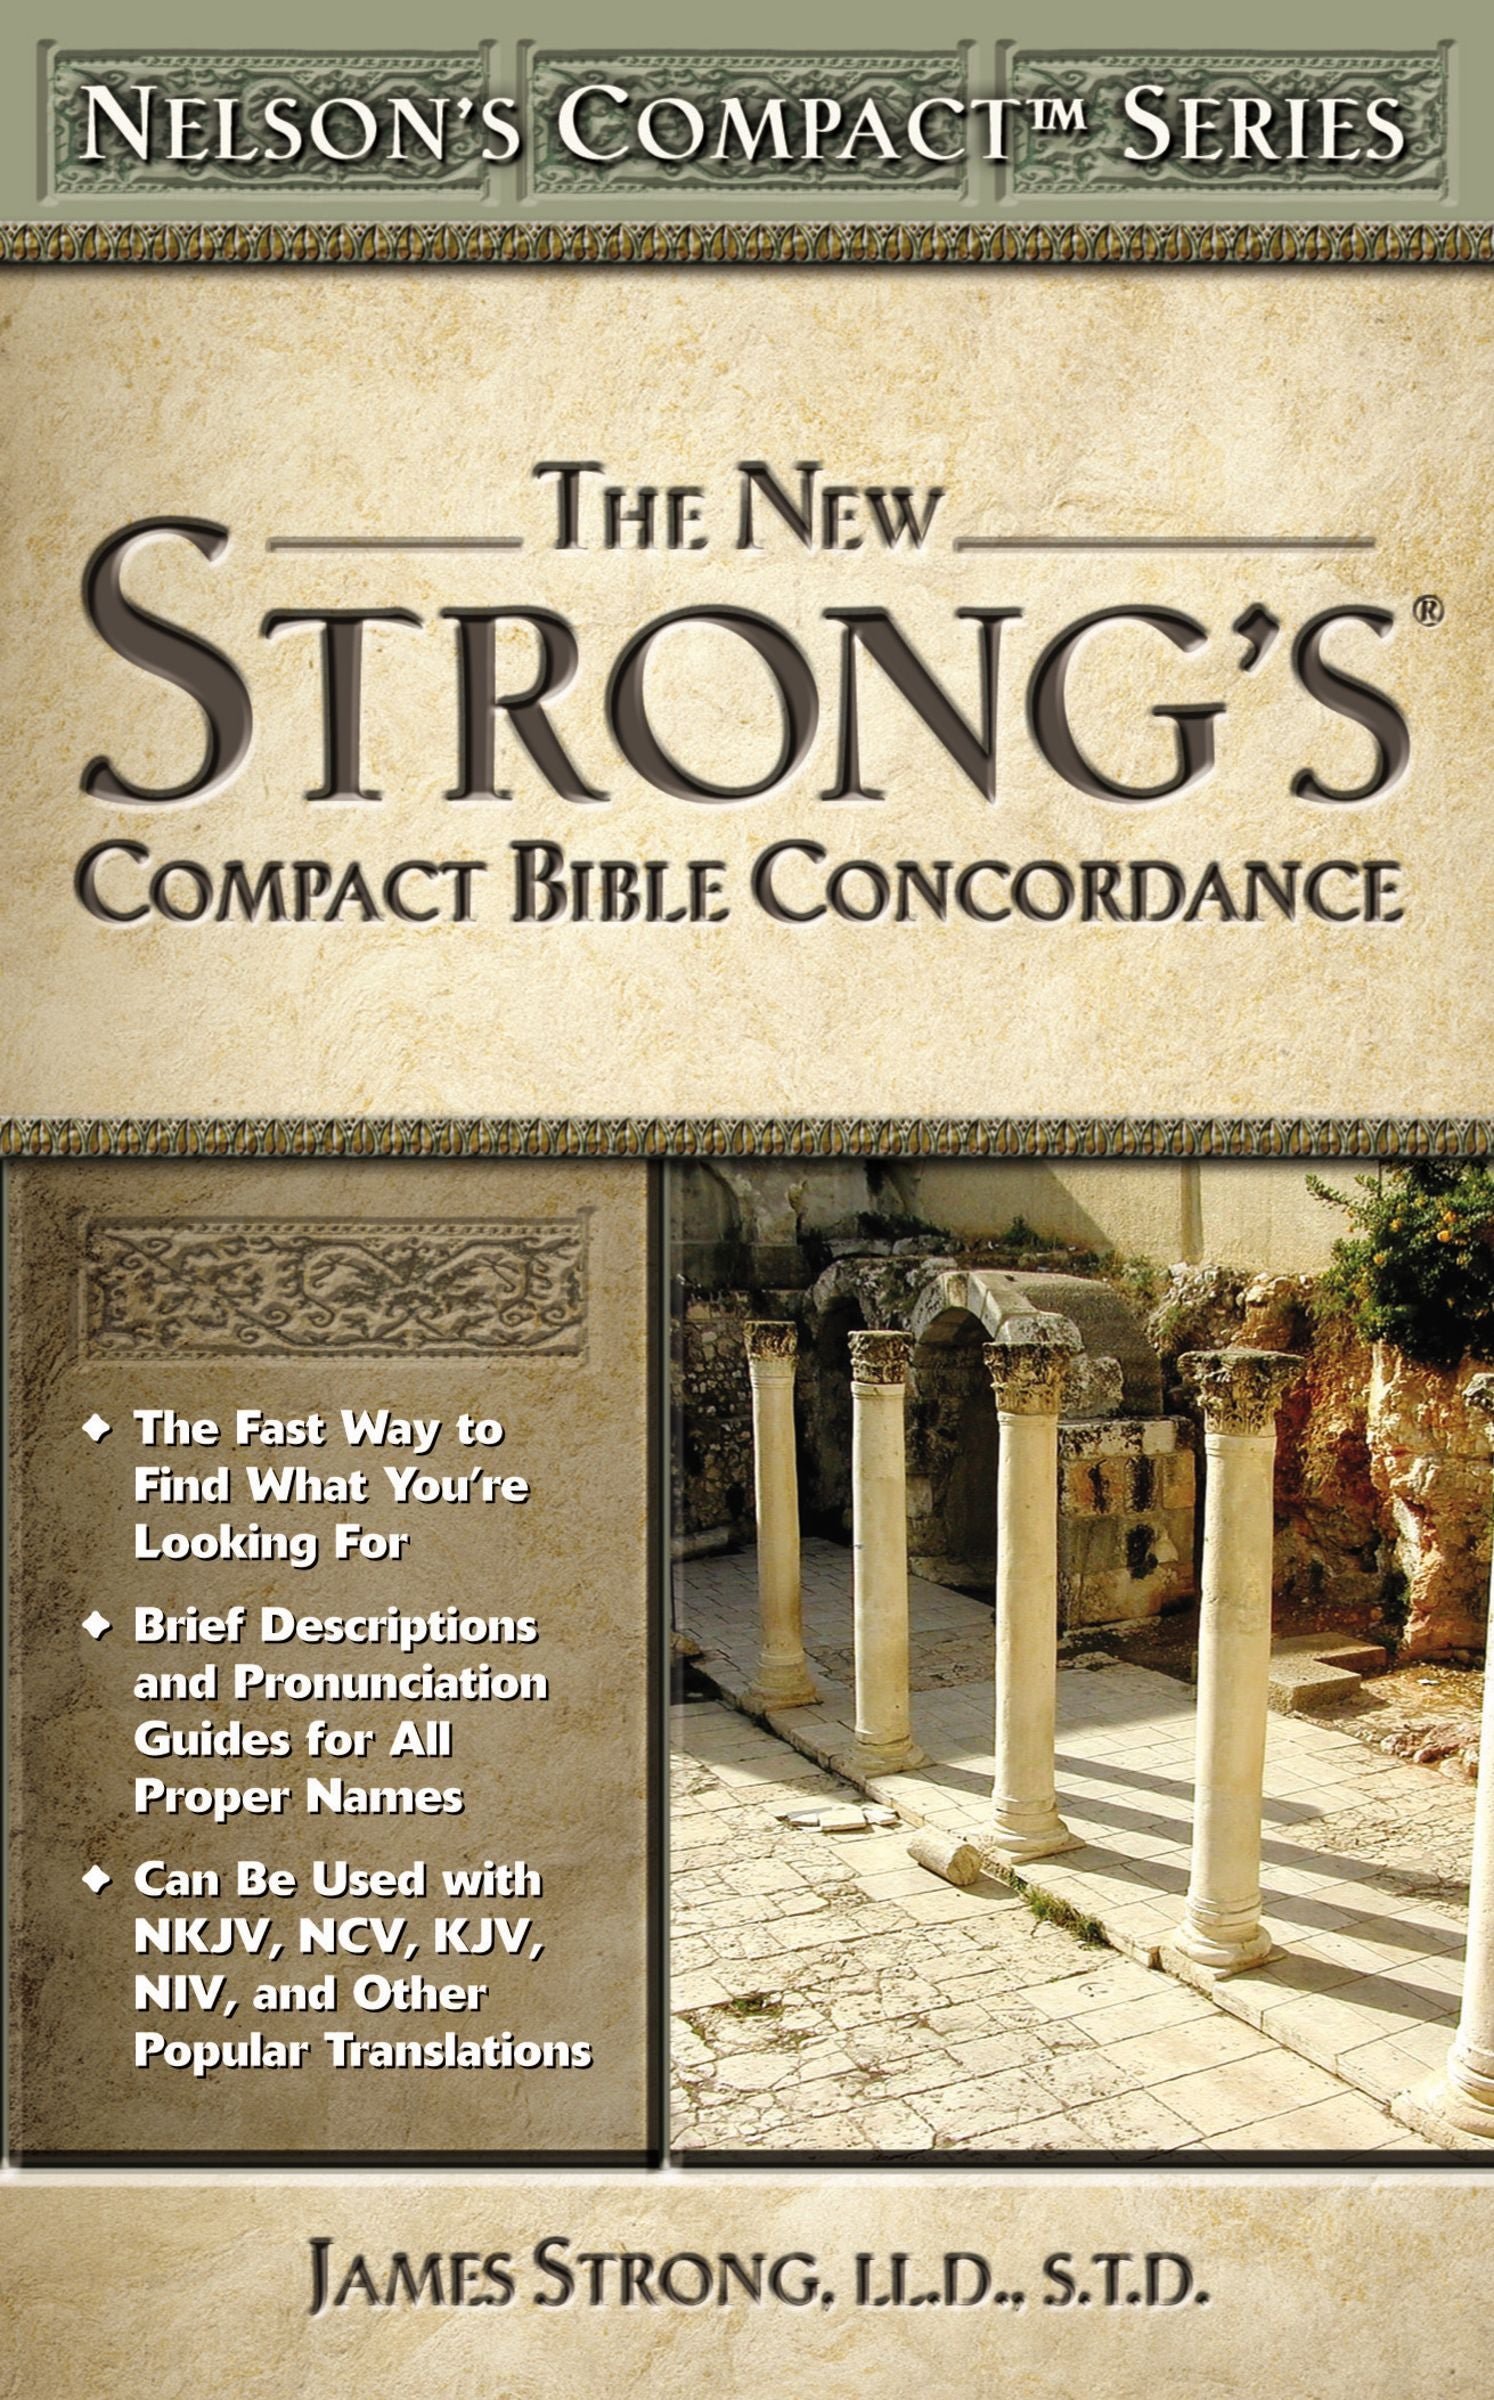 Image of New Strong's Compact Bible Concordance other